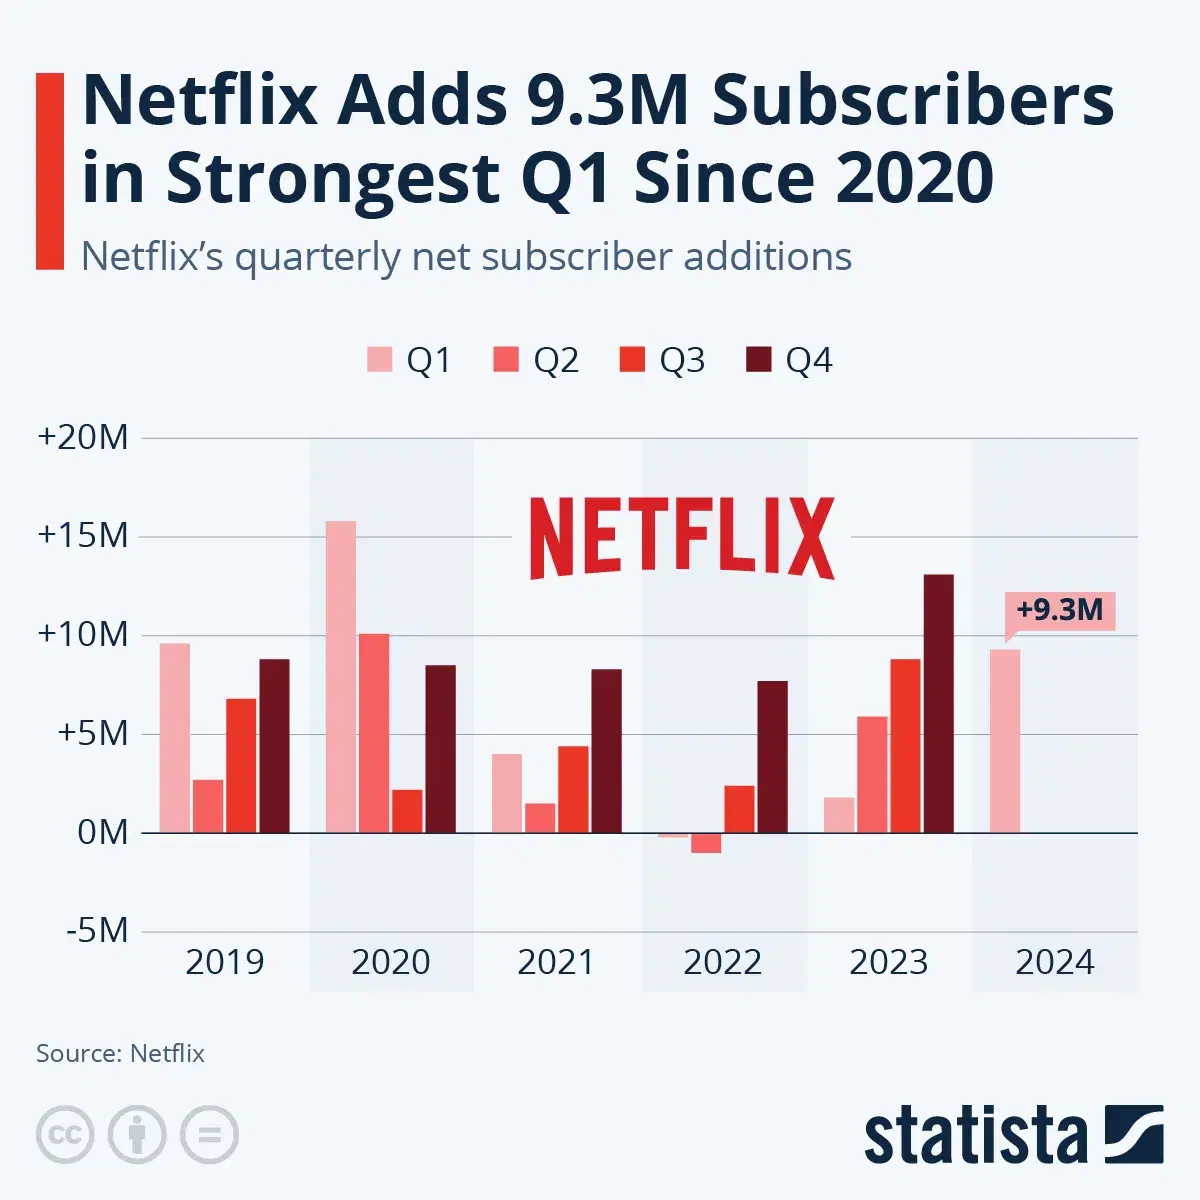 Netflix Adds 9.3M Subscribers in Strongest Q1 Since 2020